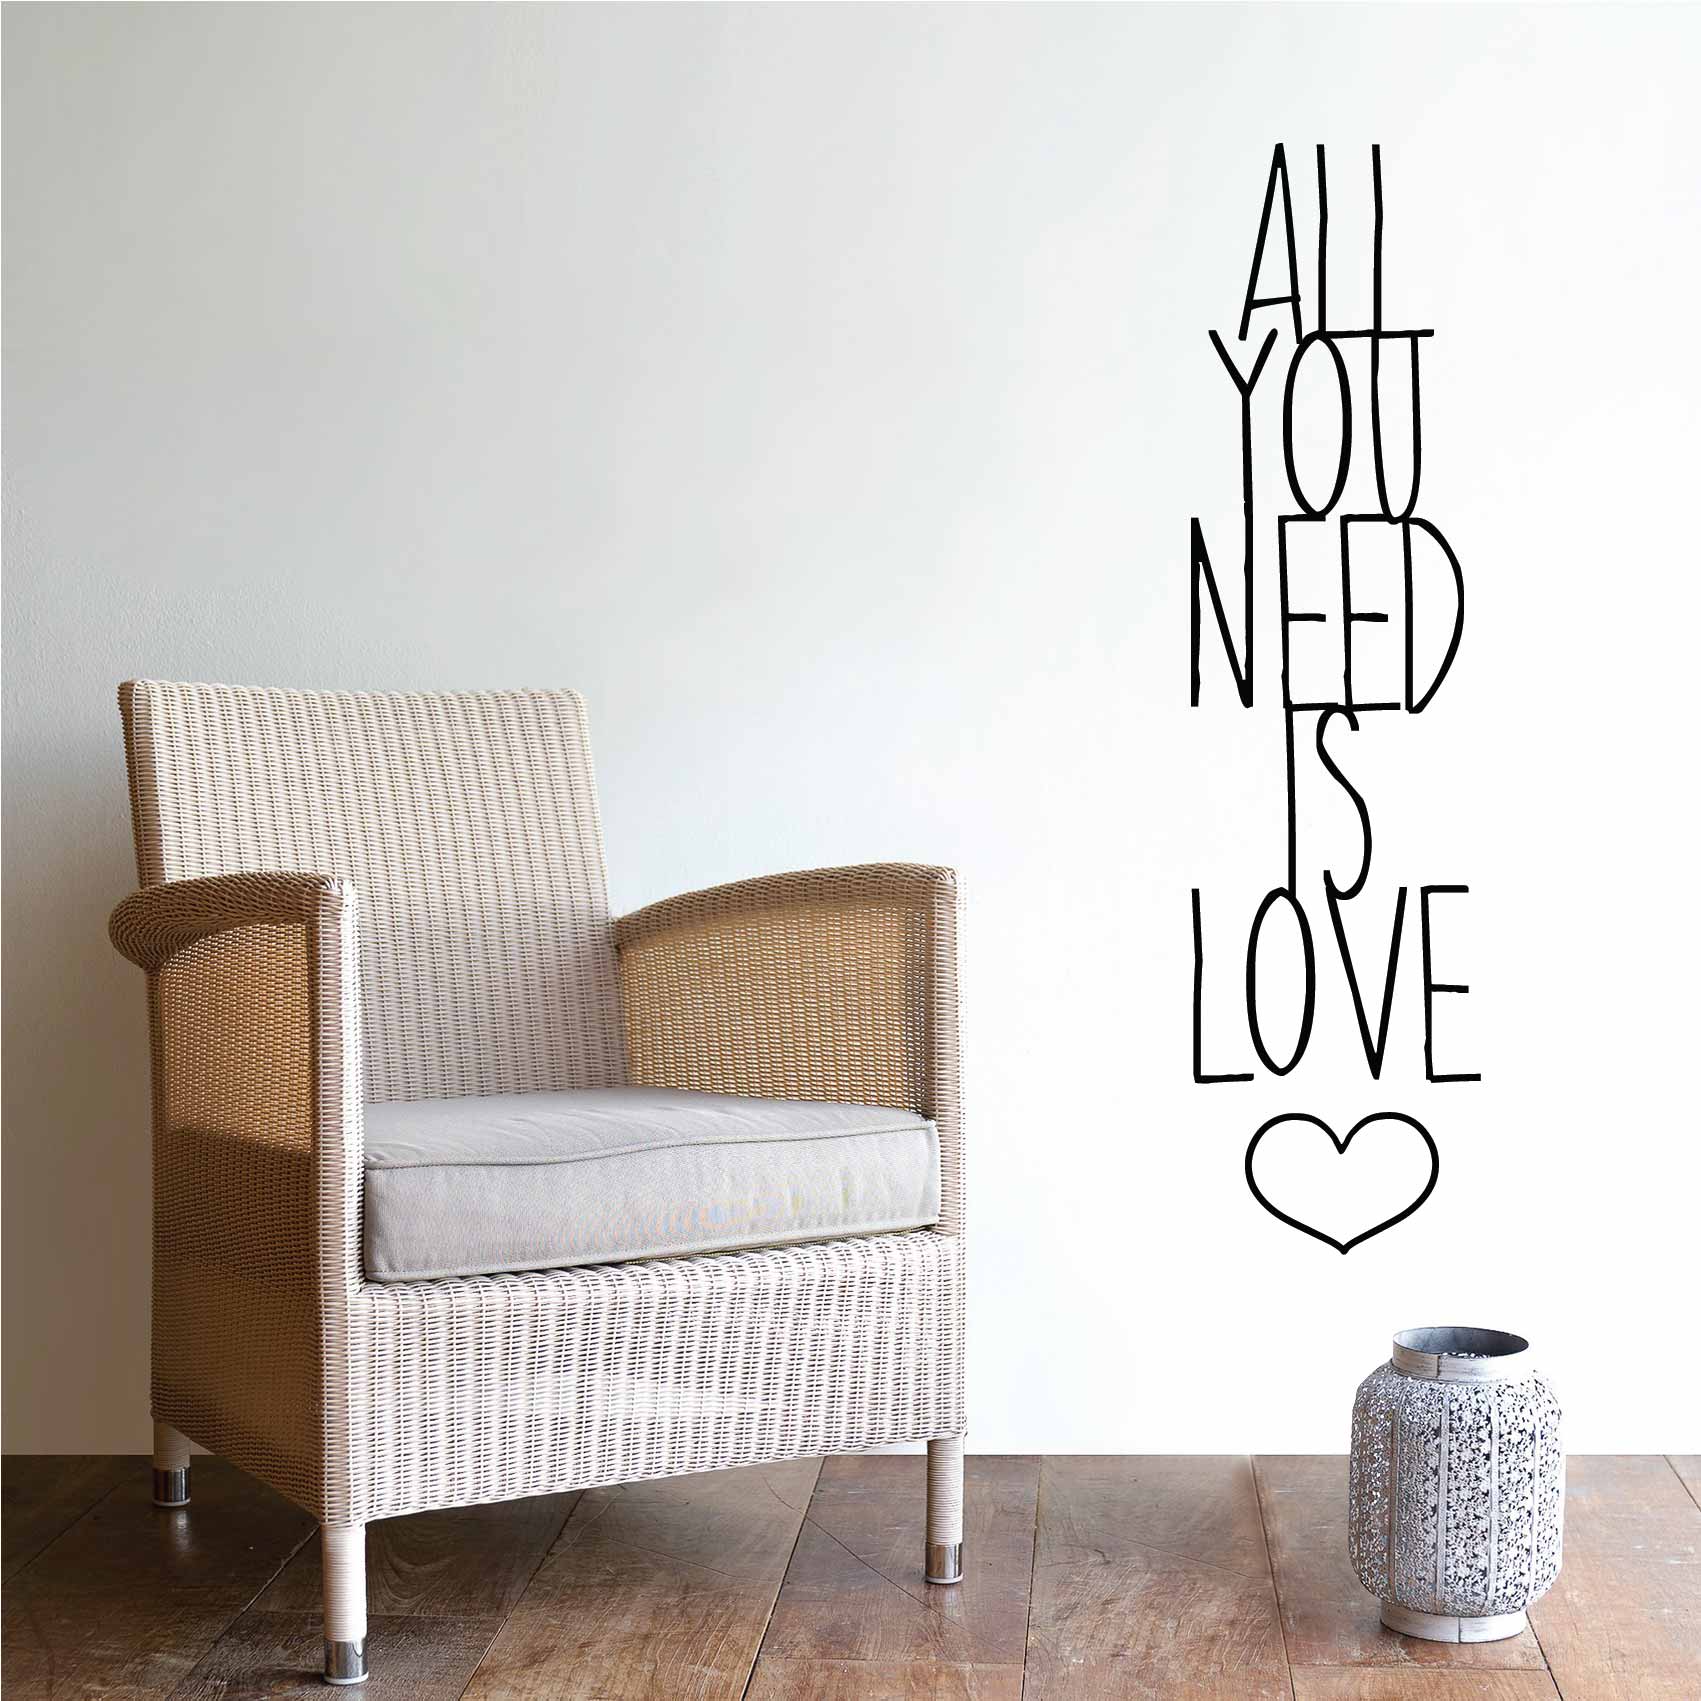 stickers-all-you-need-is-love-ref11amour-stickers-muraux-amour-autocollant-deco-chambre-salon-cuisine-sticker-mural-love